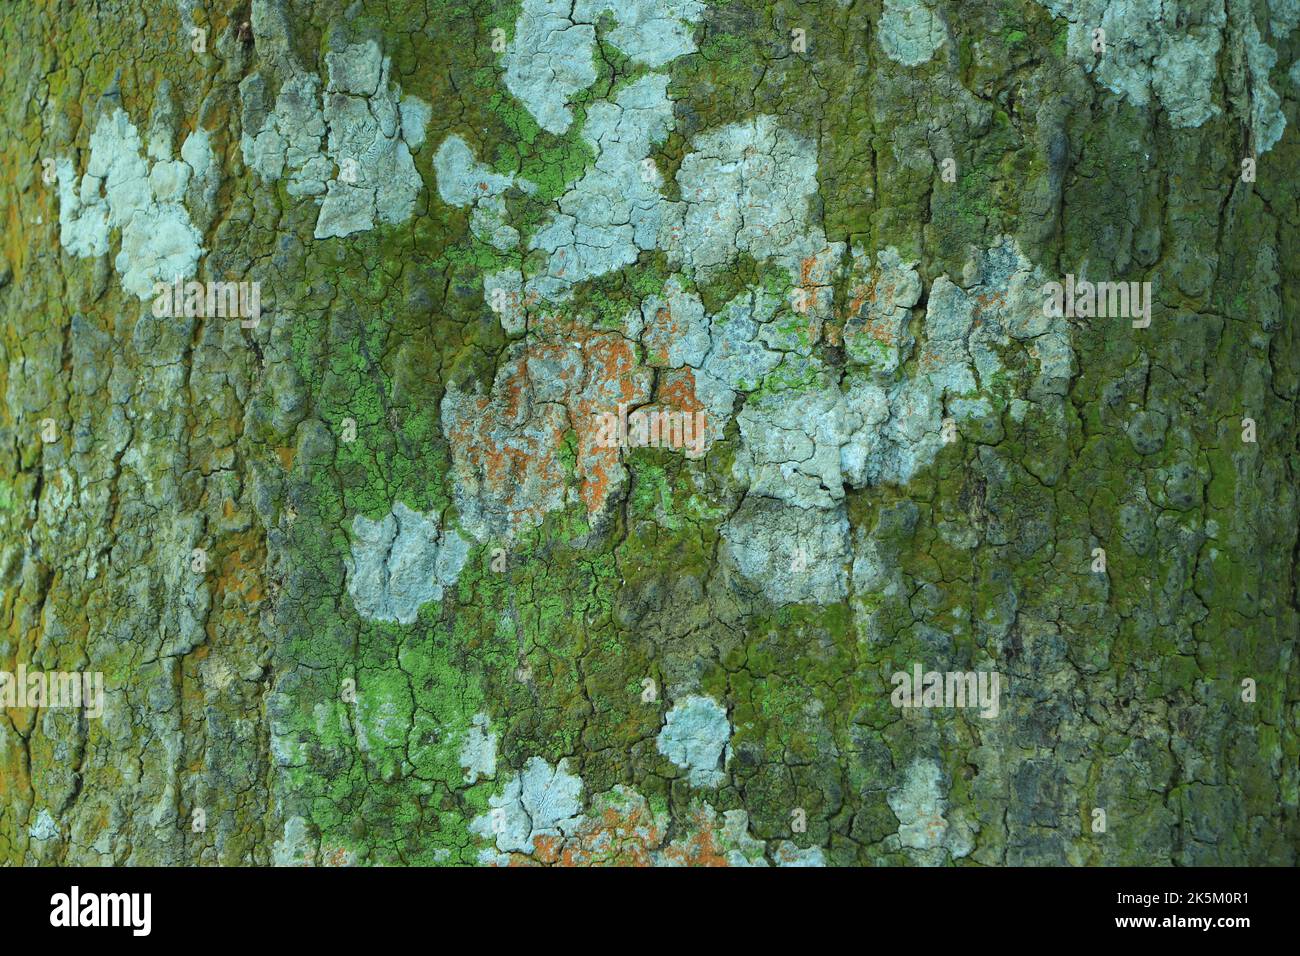 Old wood cracked texture background Stock Photo